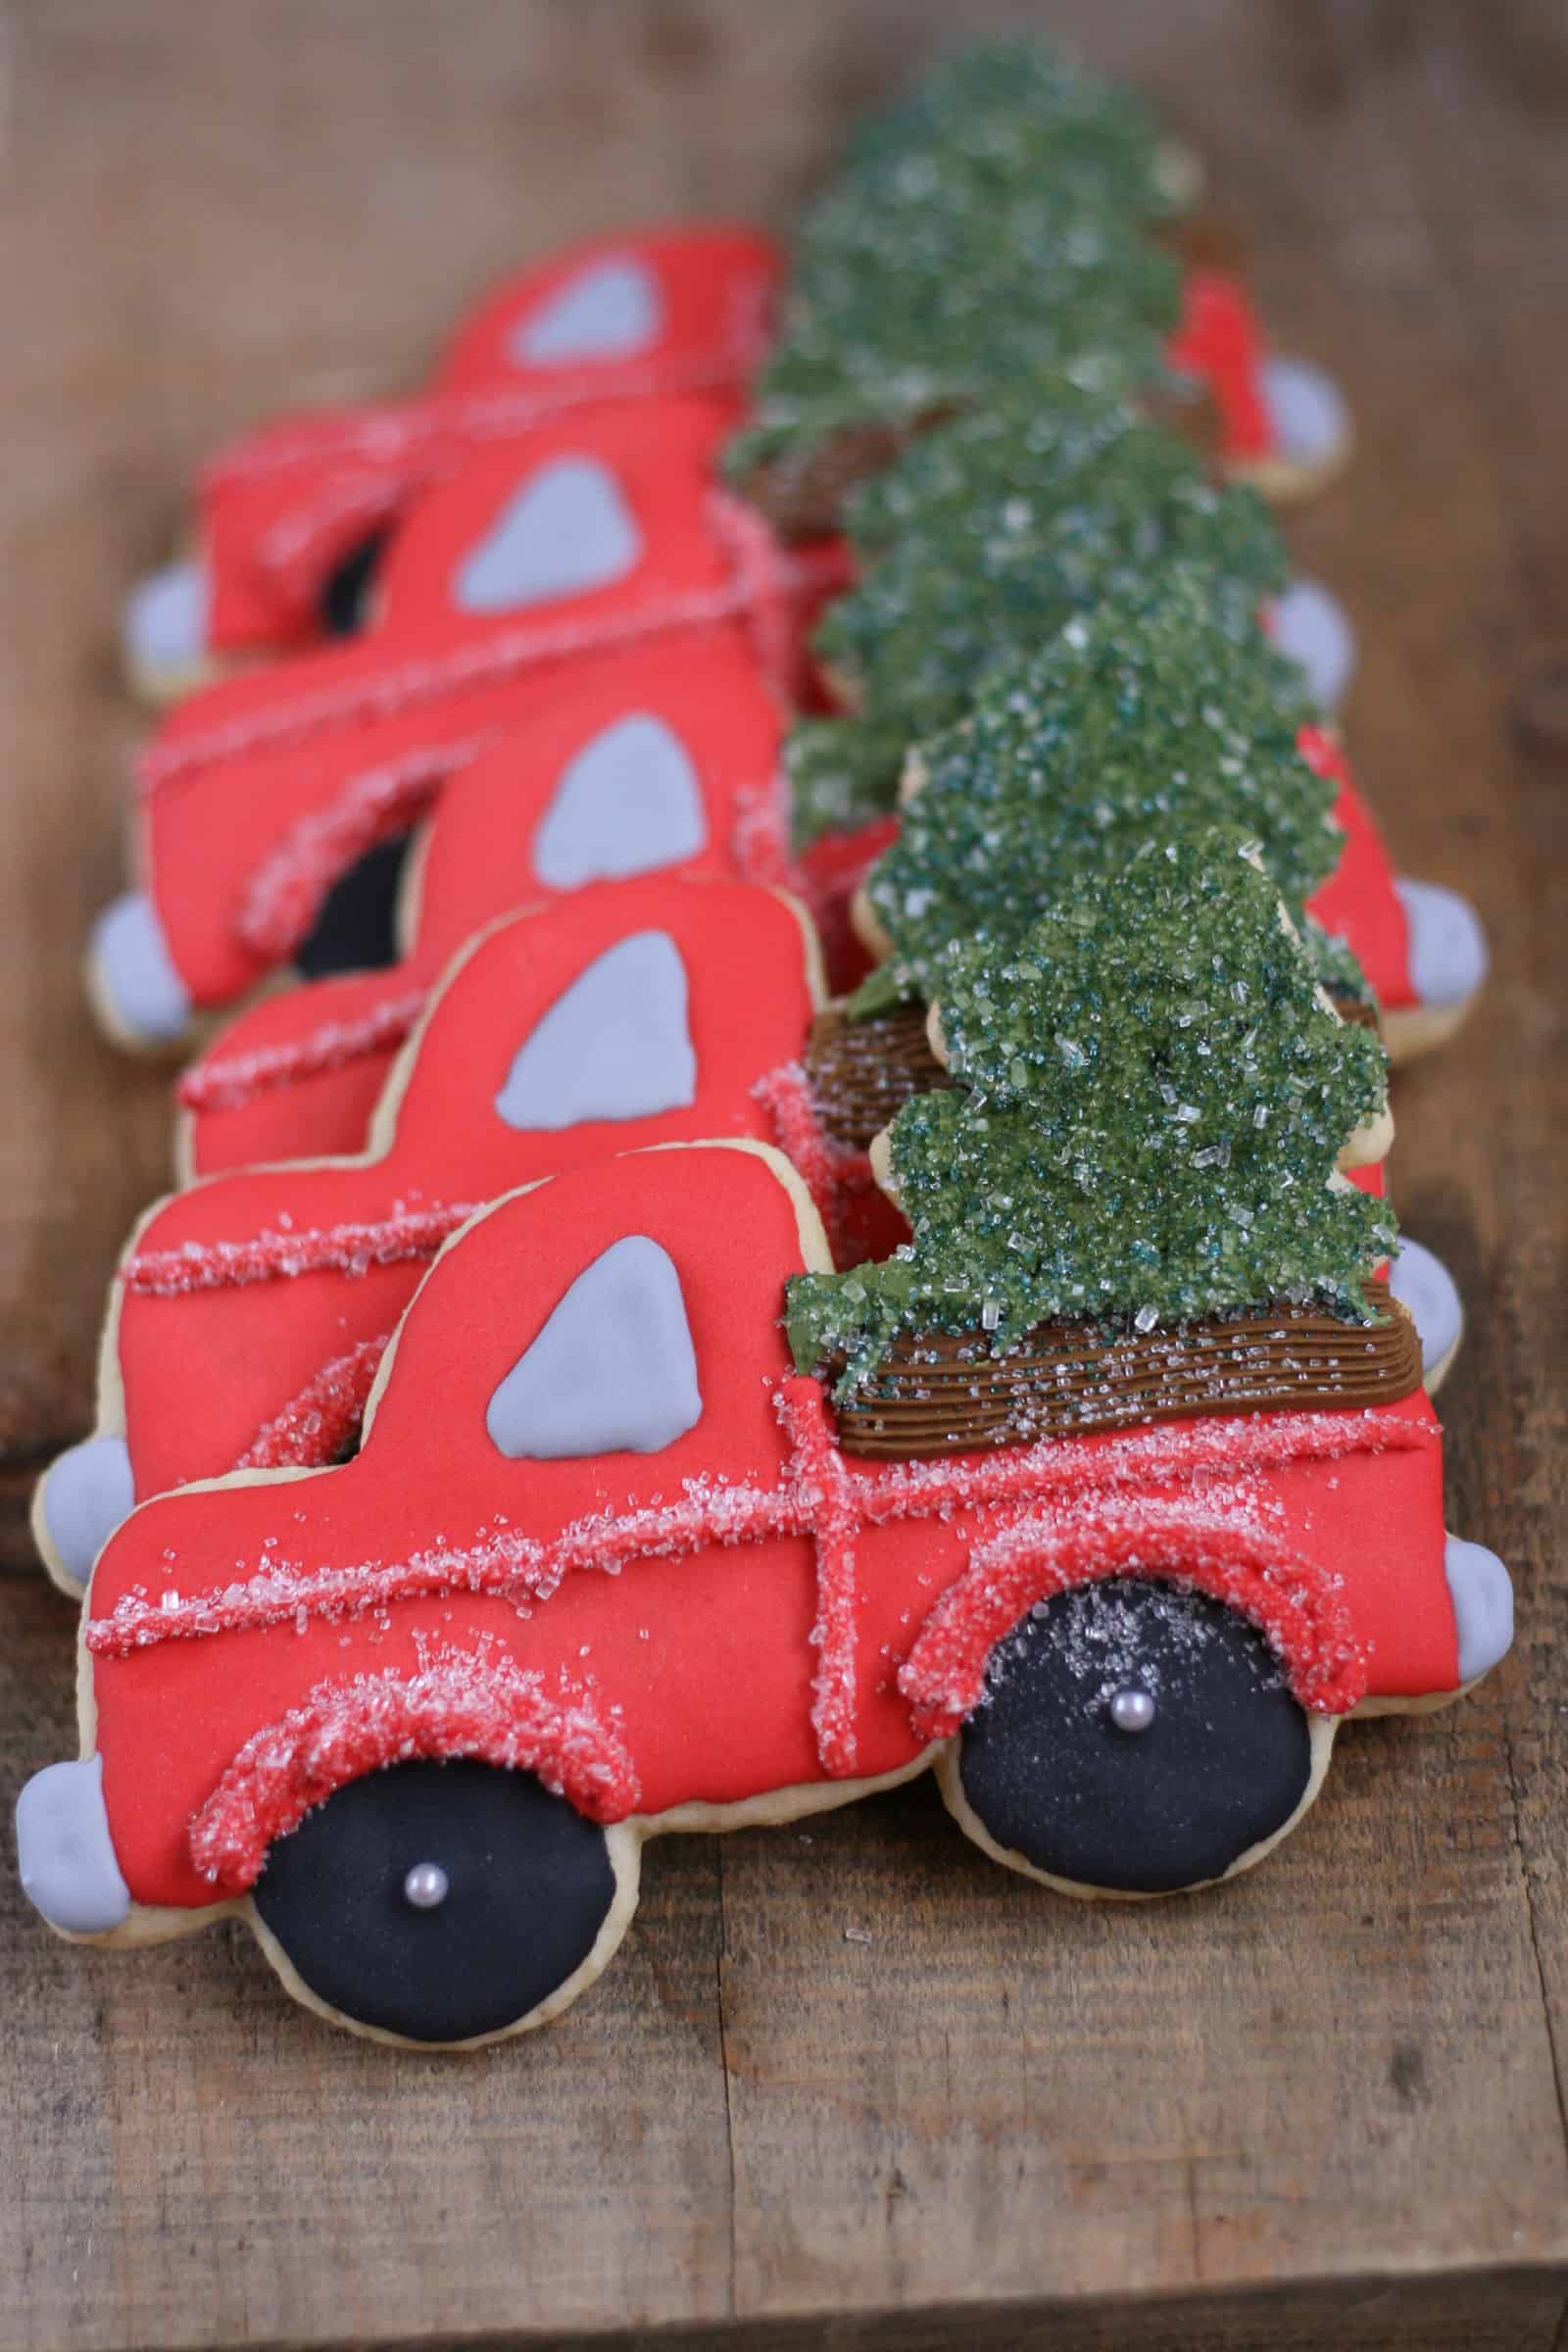 Decorated Sugar cookies vintage red trucks with Christmas tree in the back of the truck bed.